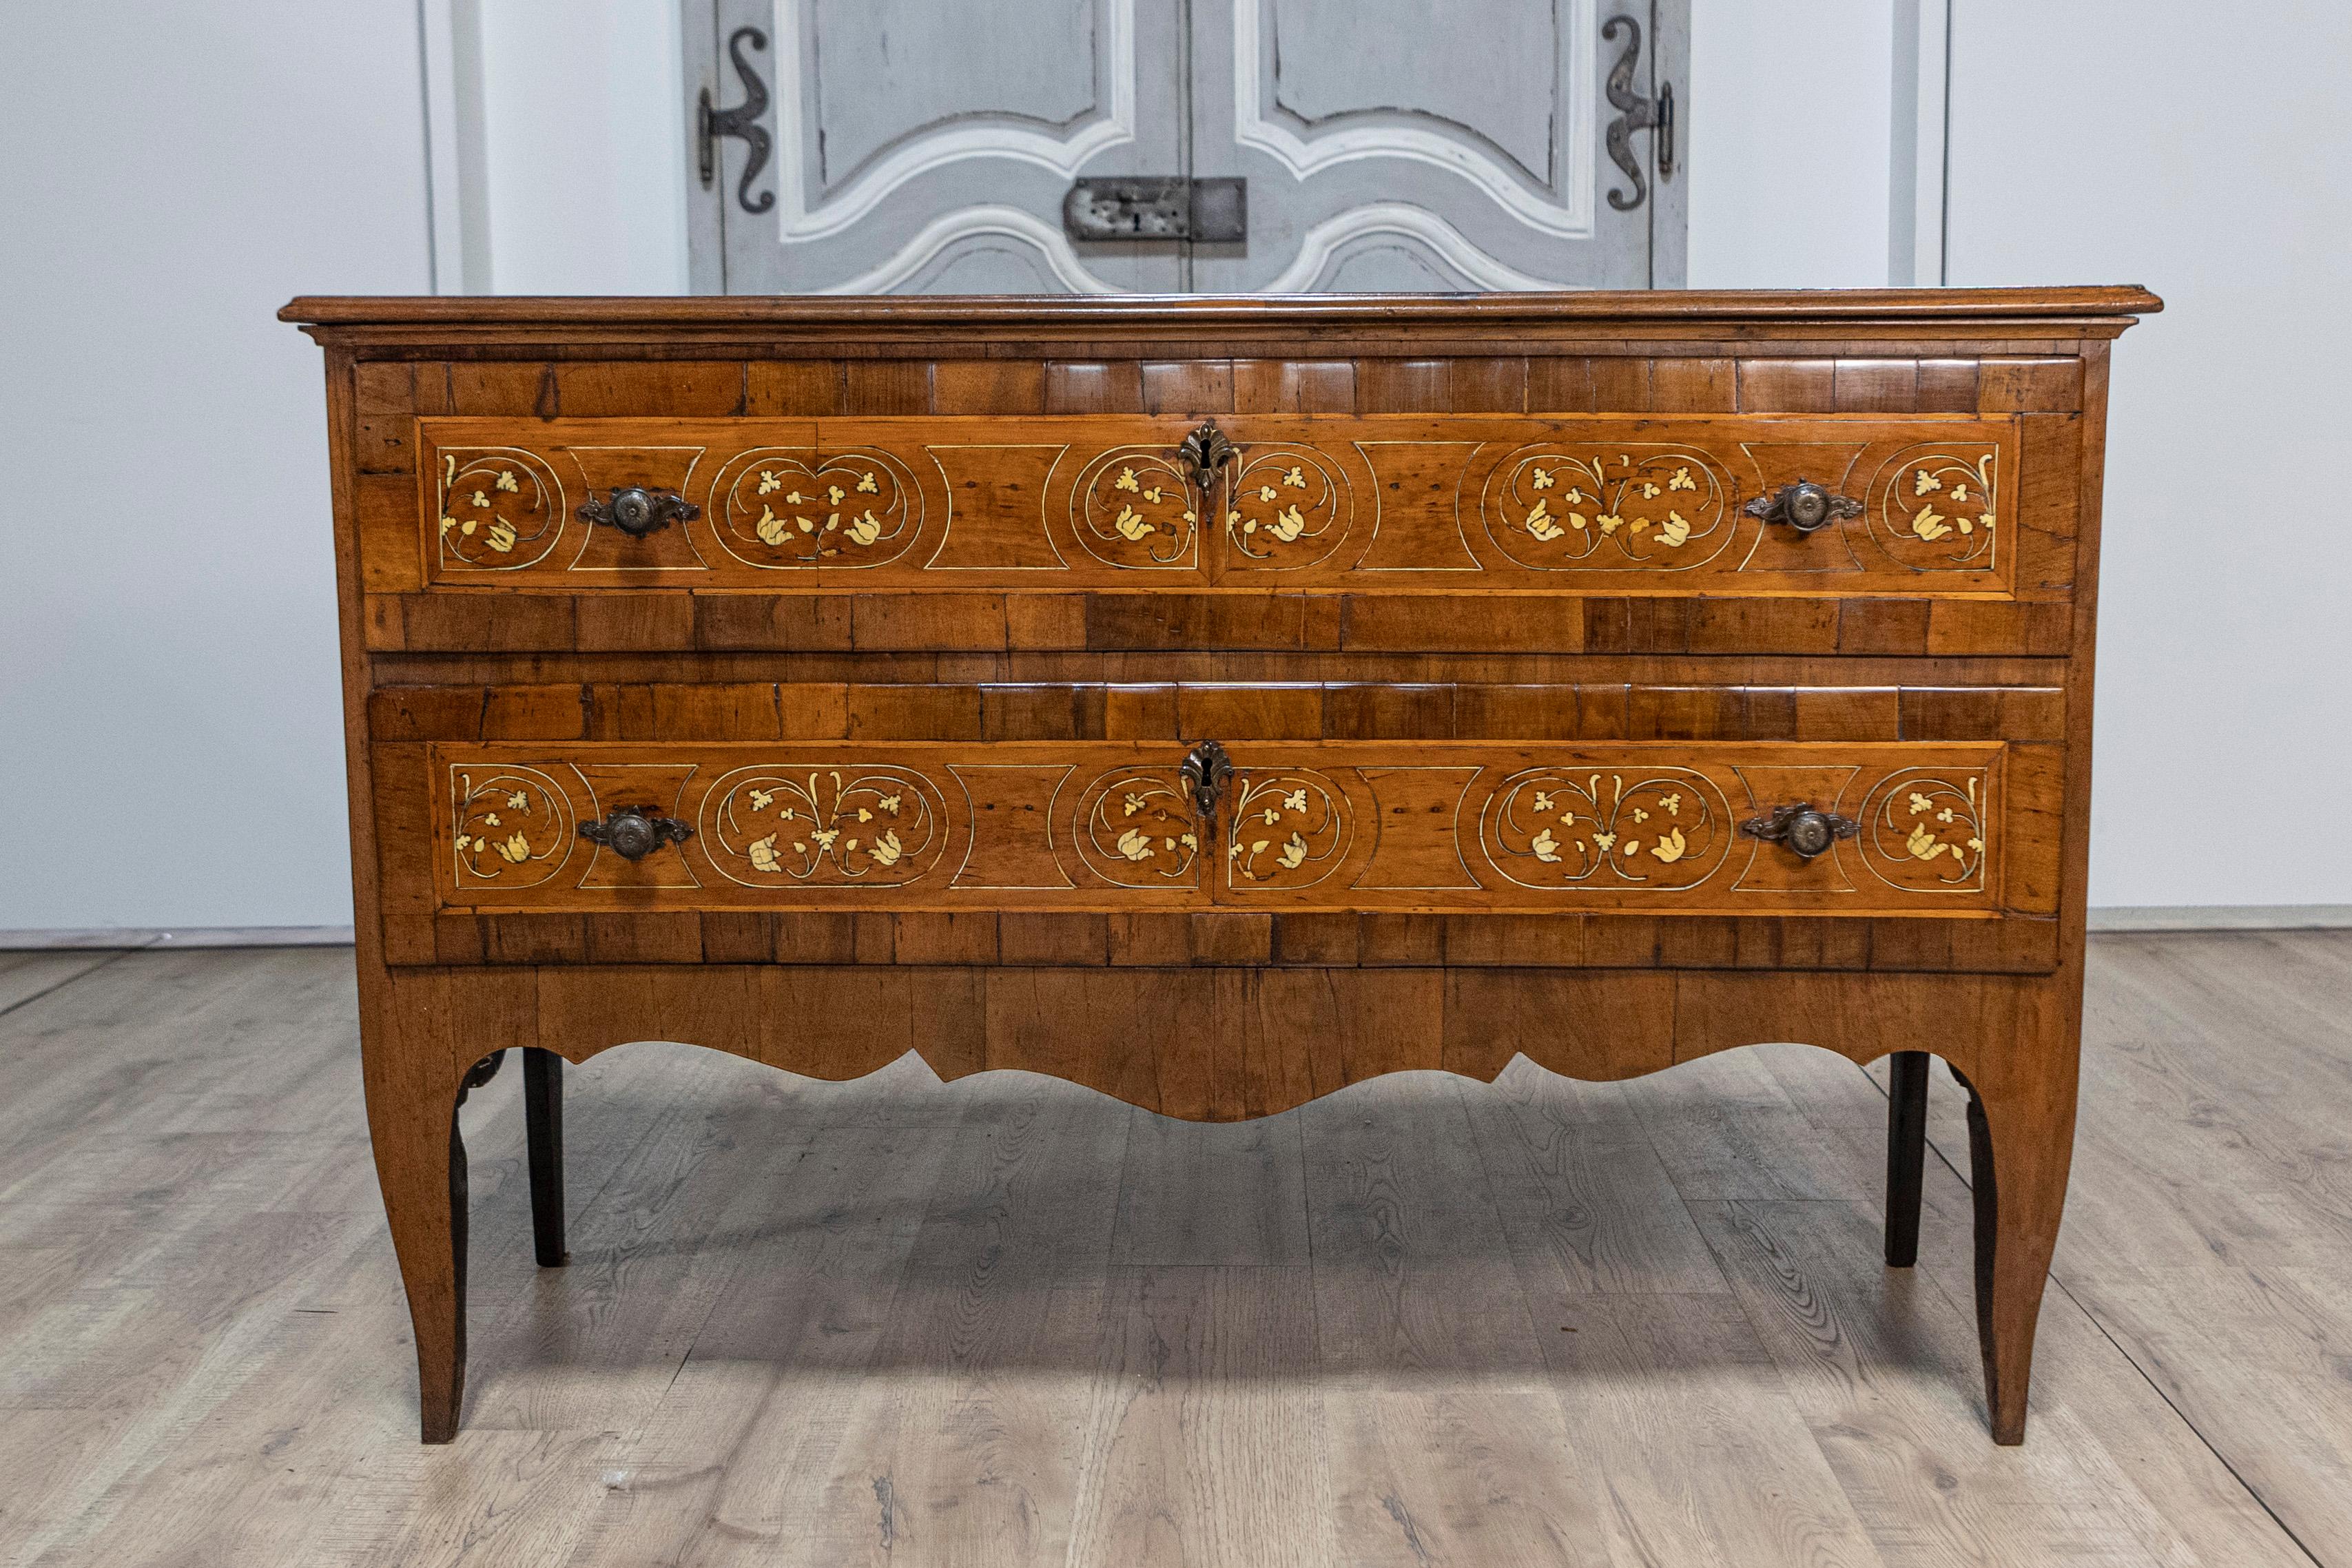 18th Century Italian Walnut, Mahogany and Ash Two-Drawer Commode with Marquetry In Good Condition For Sale In Atlanta, GA